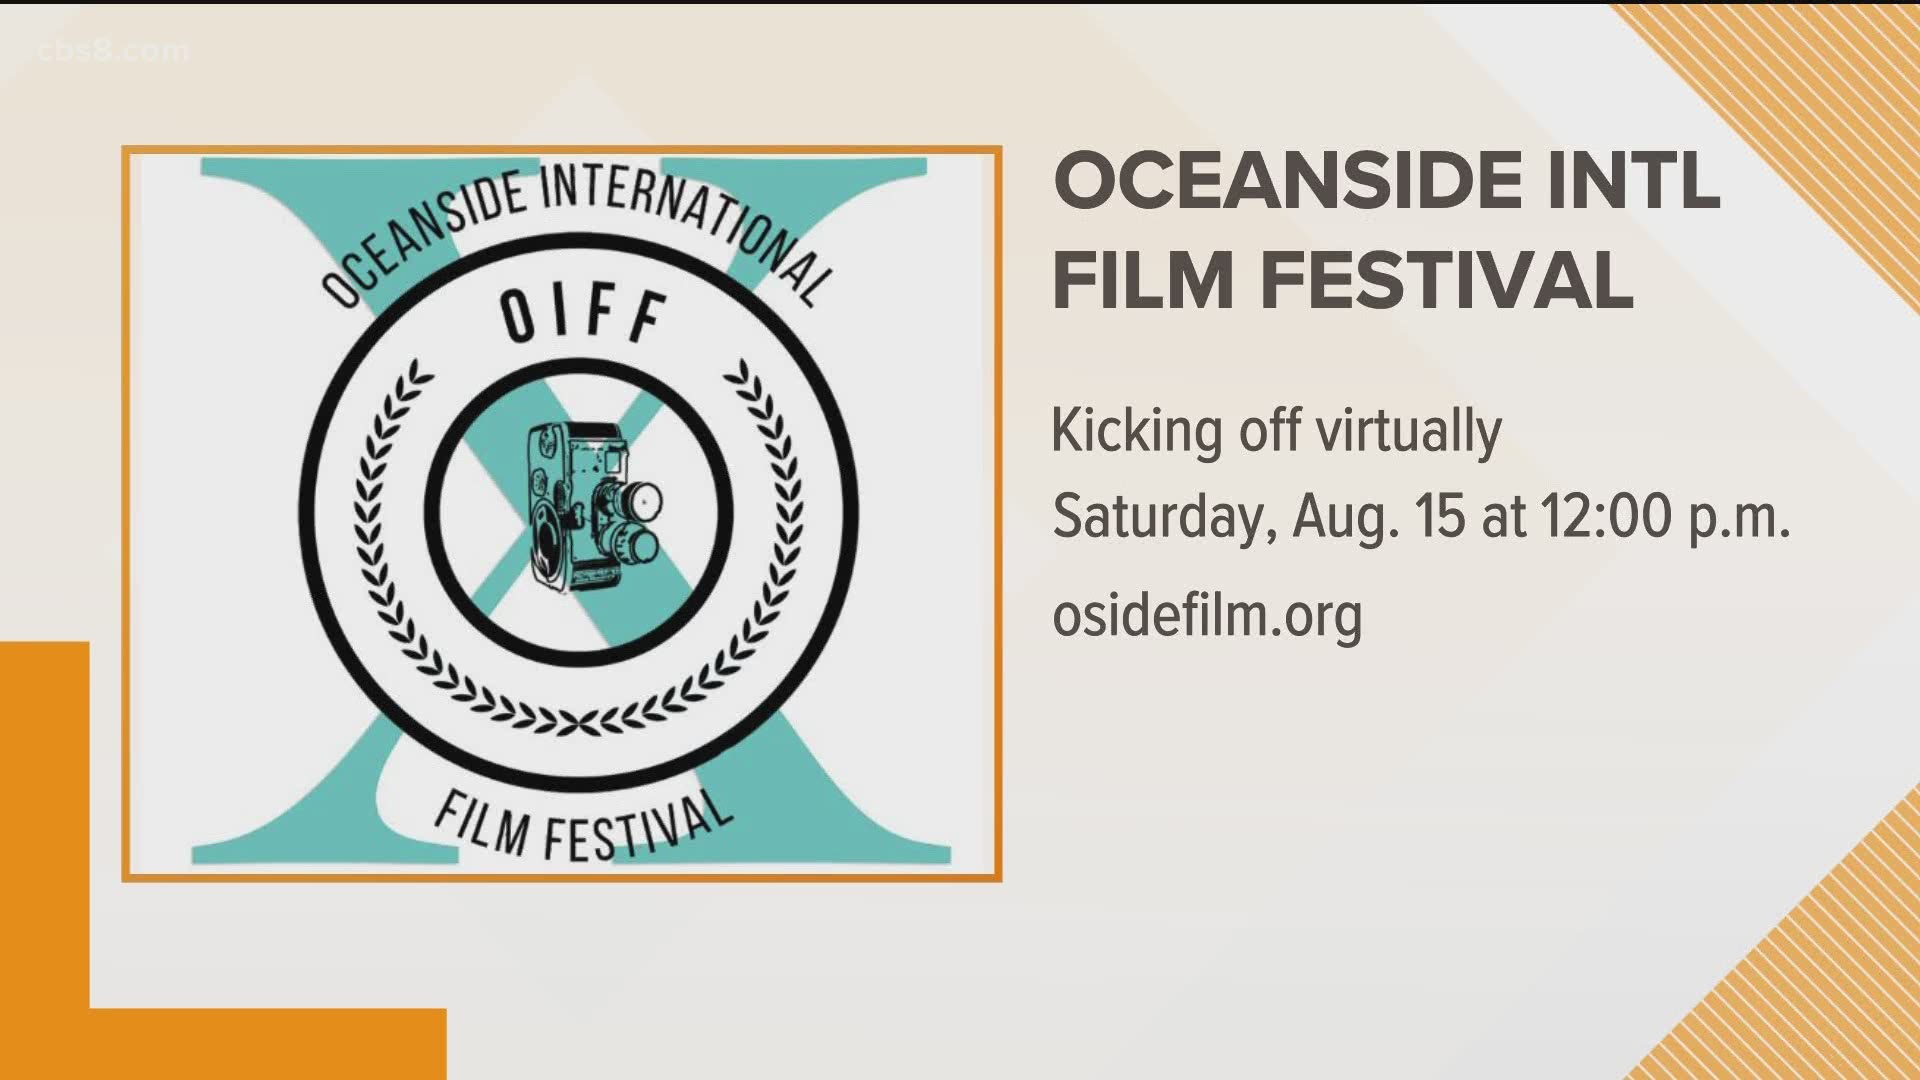 Lou Niles, Managing Editor of the Oceanside International Film Festival and filmmaker Brian Patrick Butler shared some can't miss movies you can see this weekend.